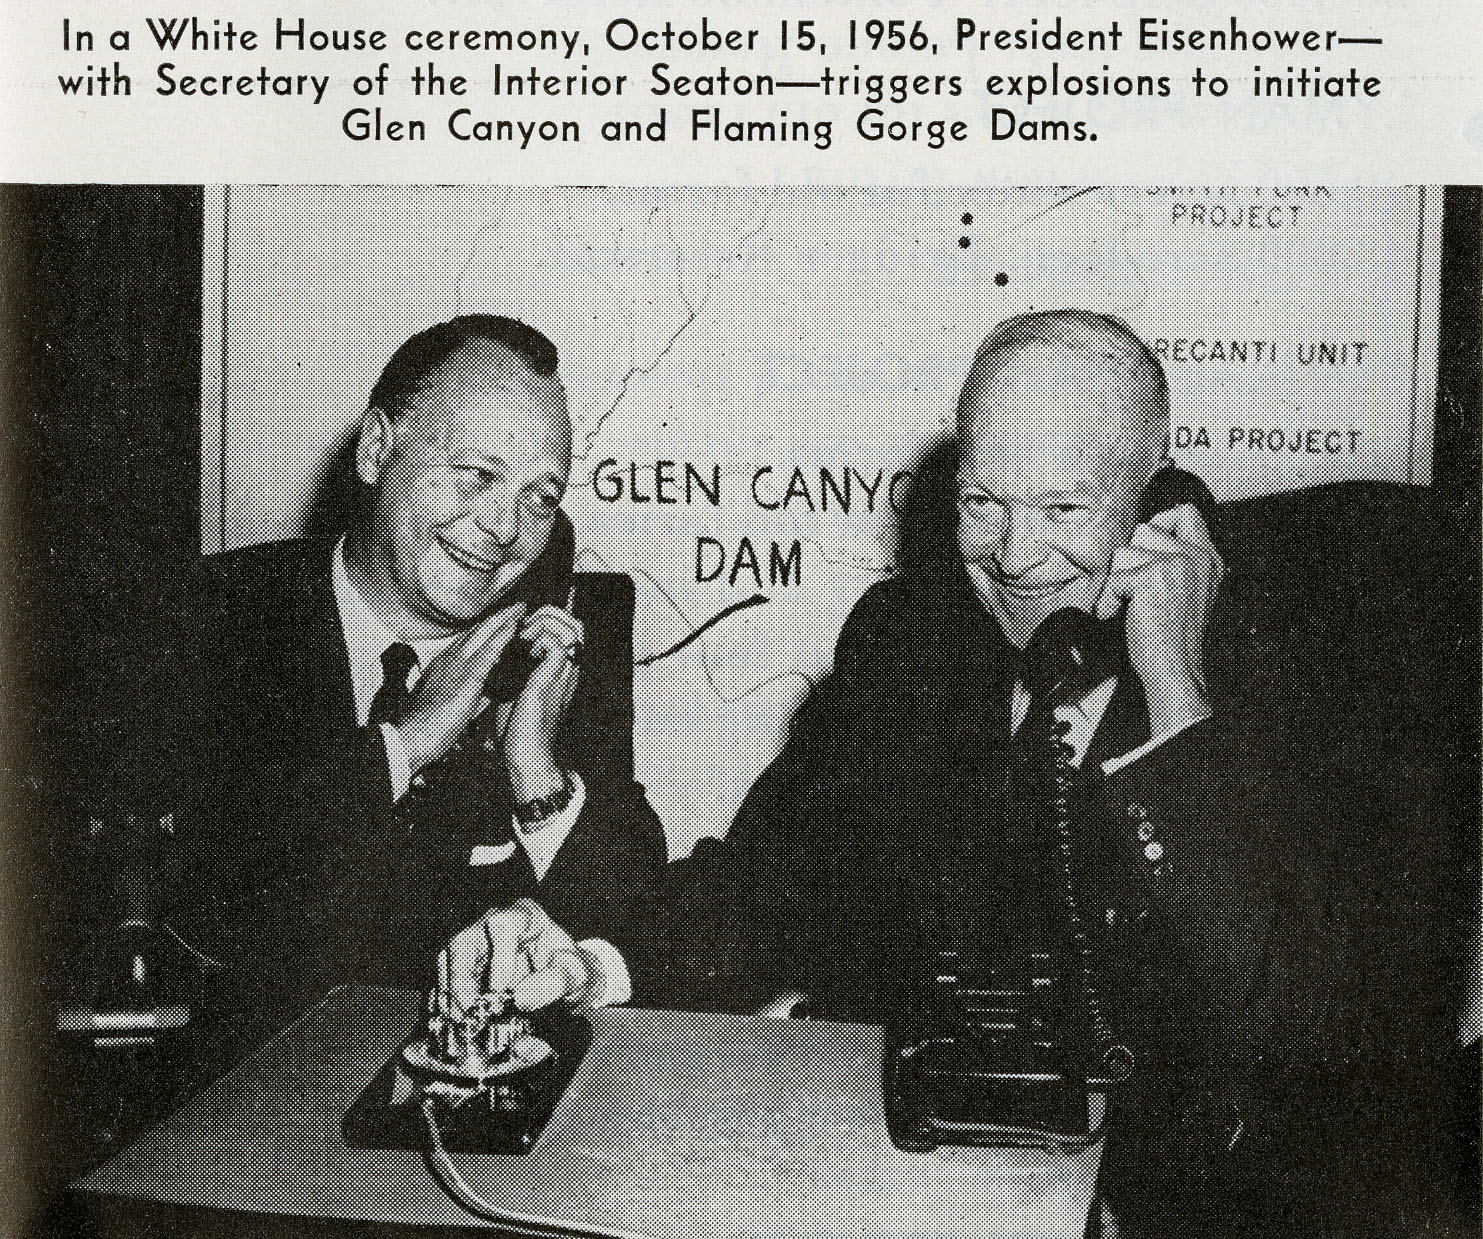 President Eisenhower triggering construction of dams at Flaming Gorge and Glen Canyon (series 200).